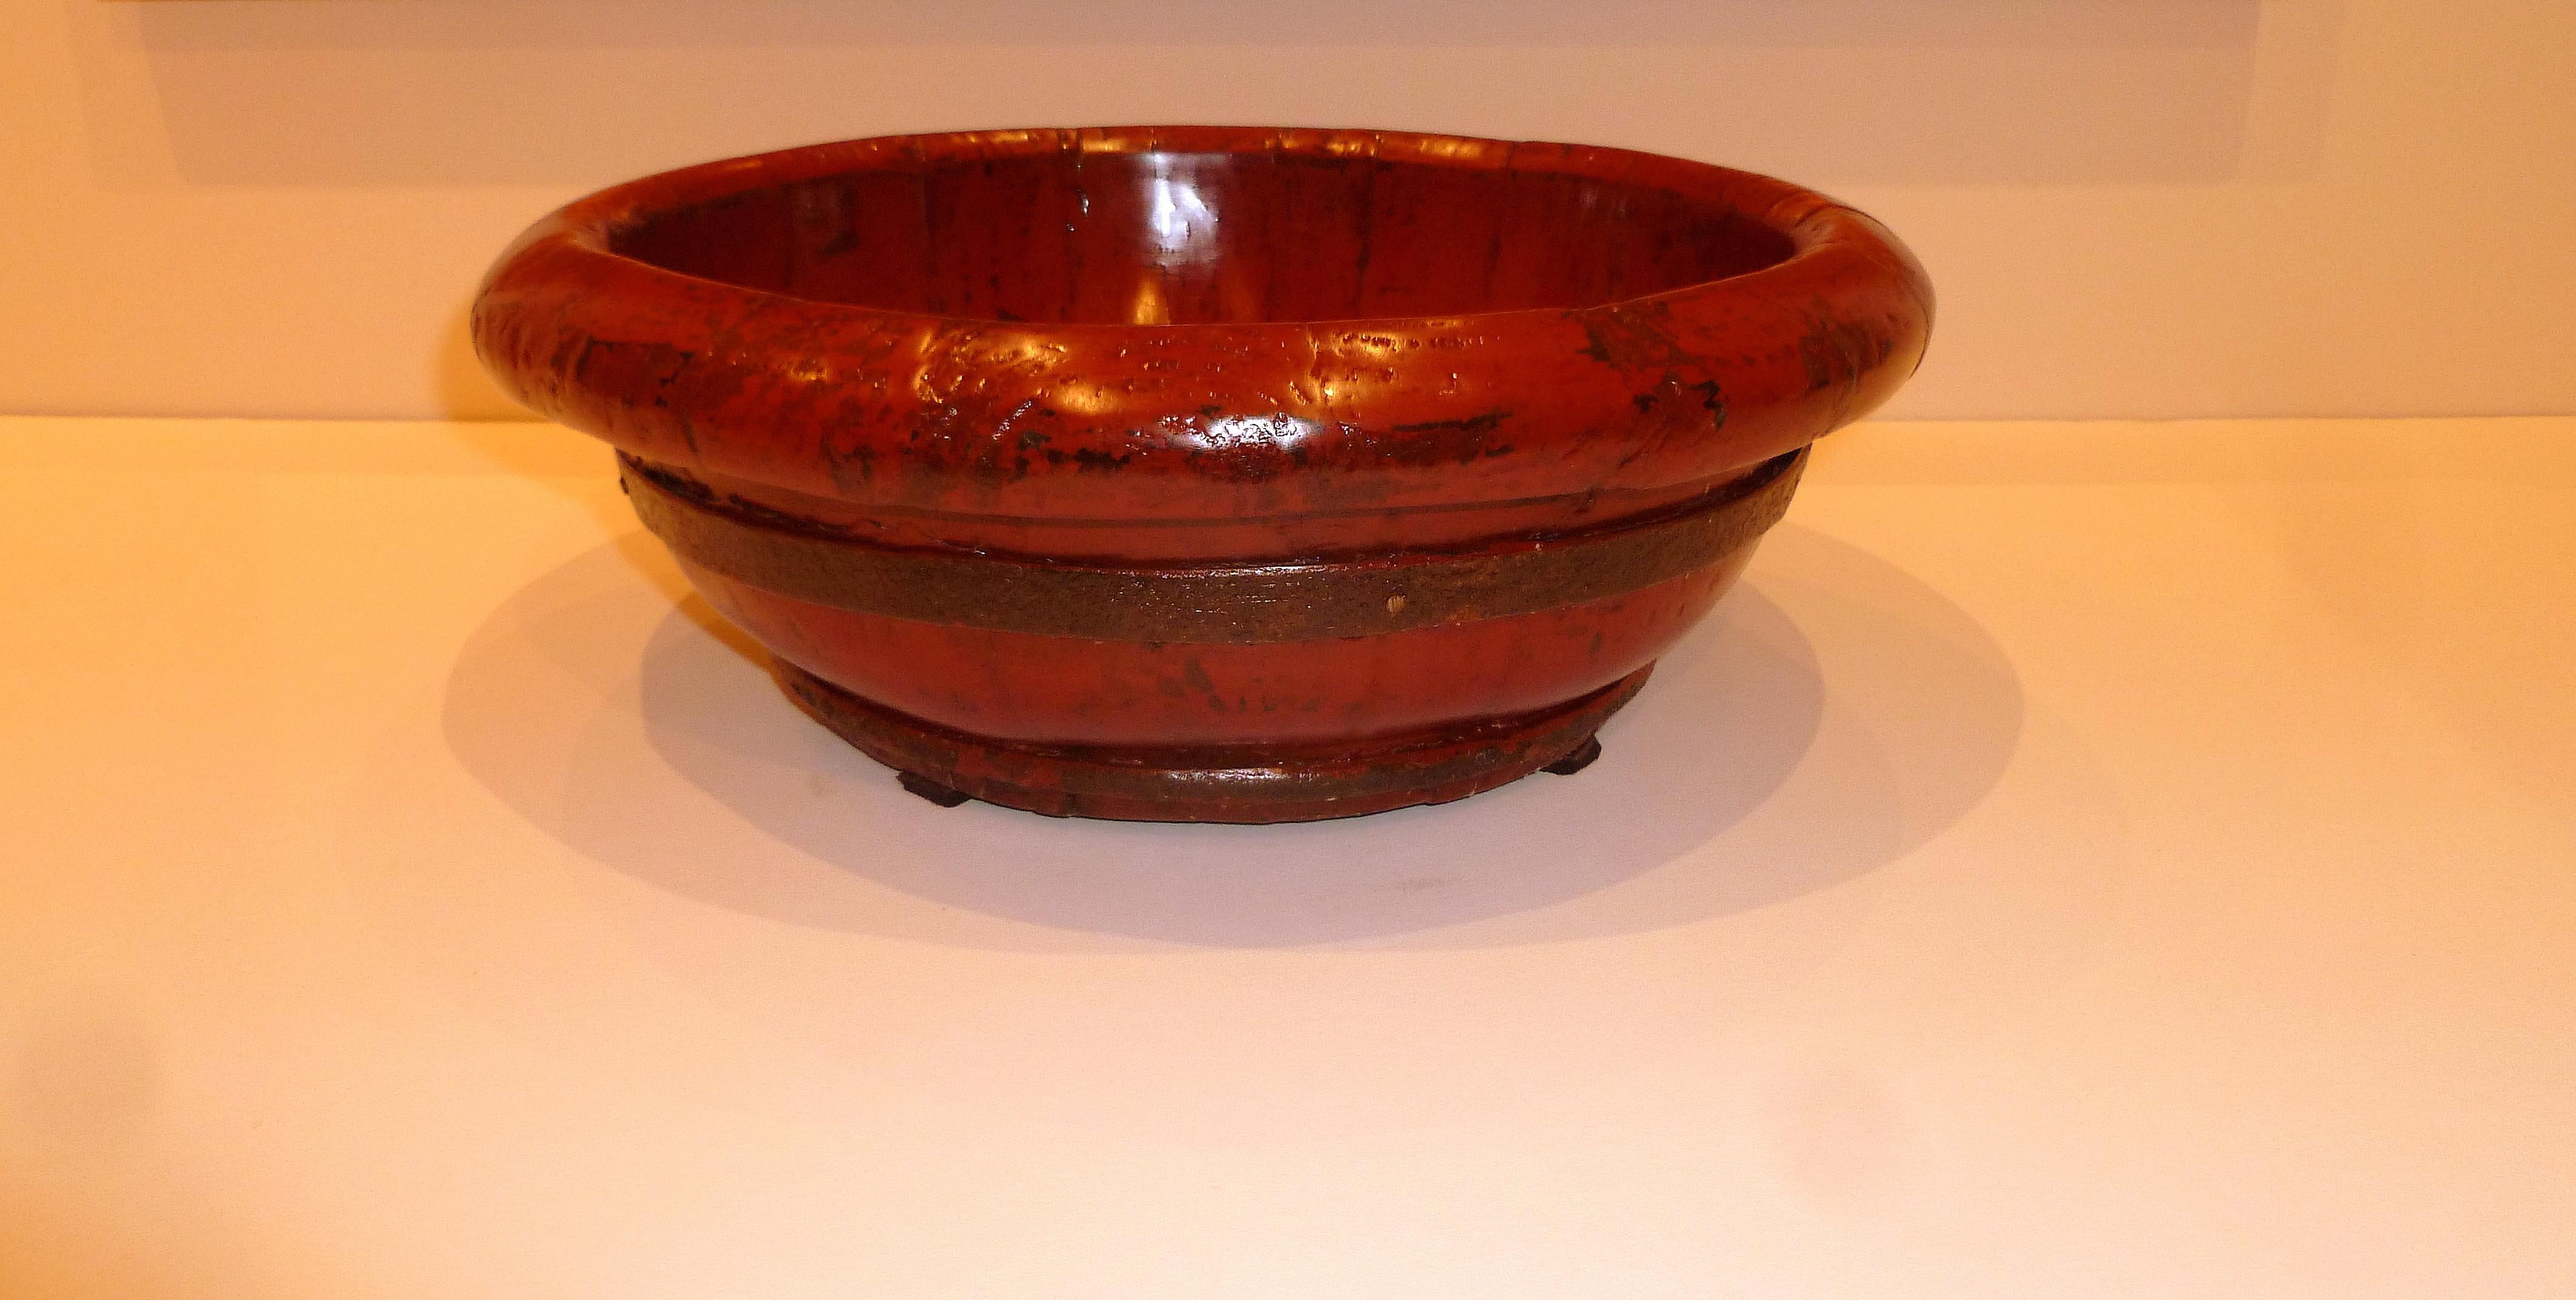 Red Lacquer Wooden Wedding Bowl. Served with Desserts.